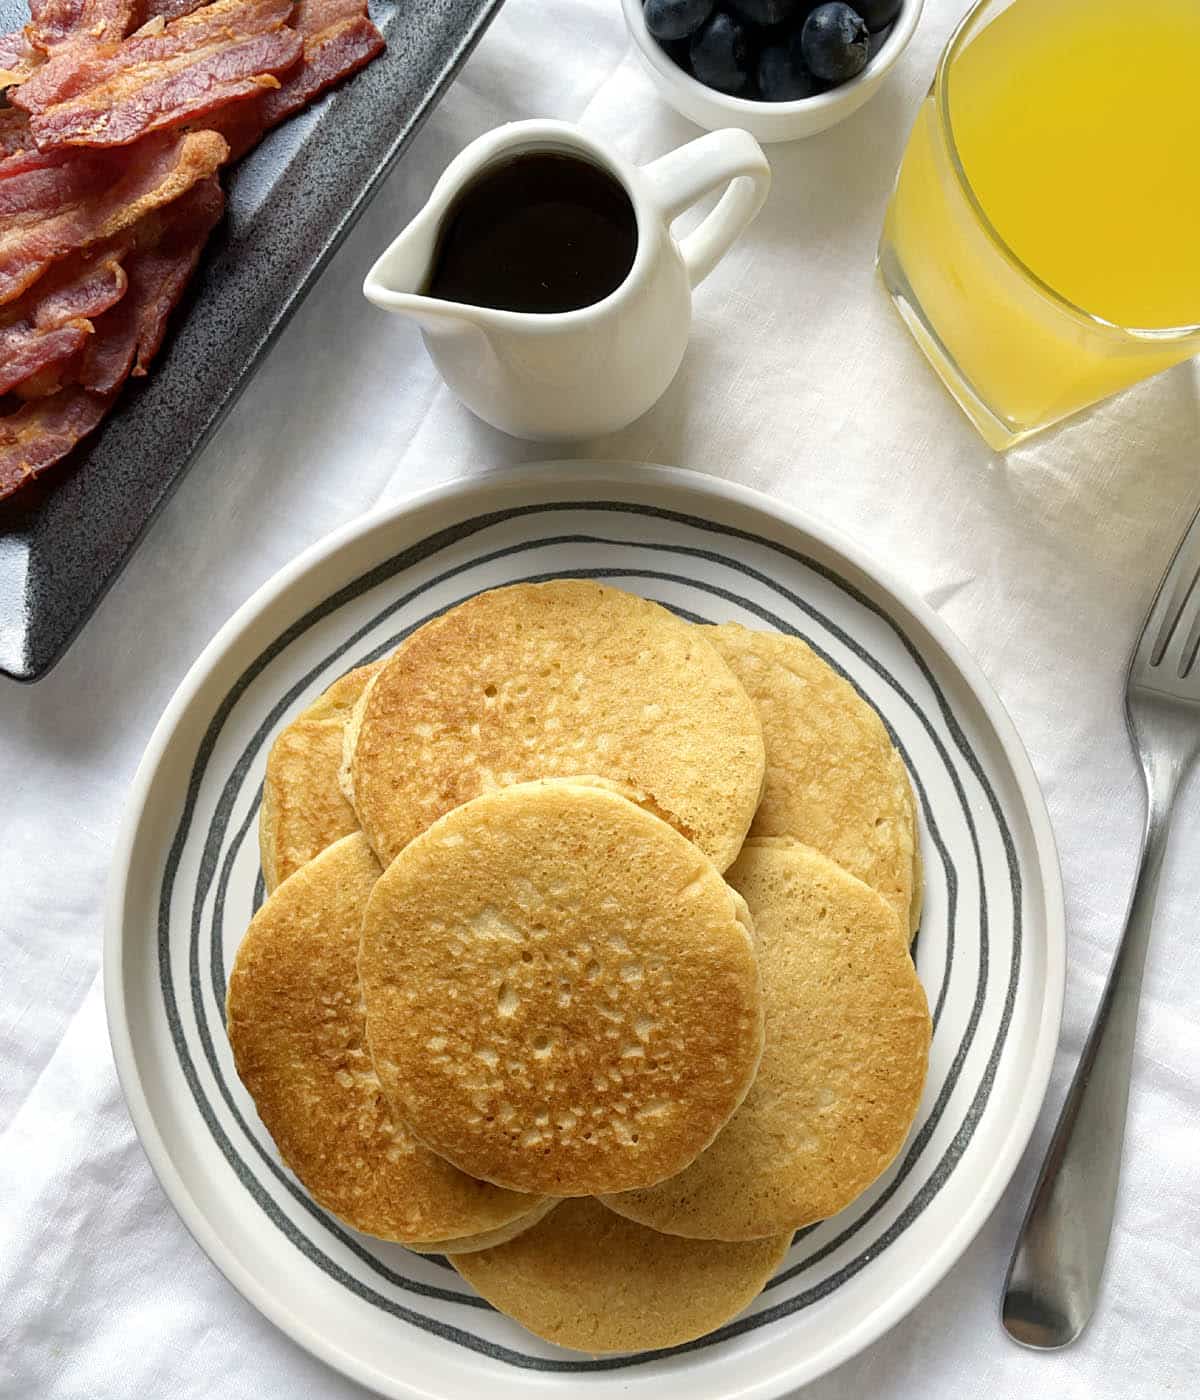 A white round plate containing almond pancakes, next to a plate of bacon, a pitcher of syrup, a glass of orange juice, and a fork.